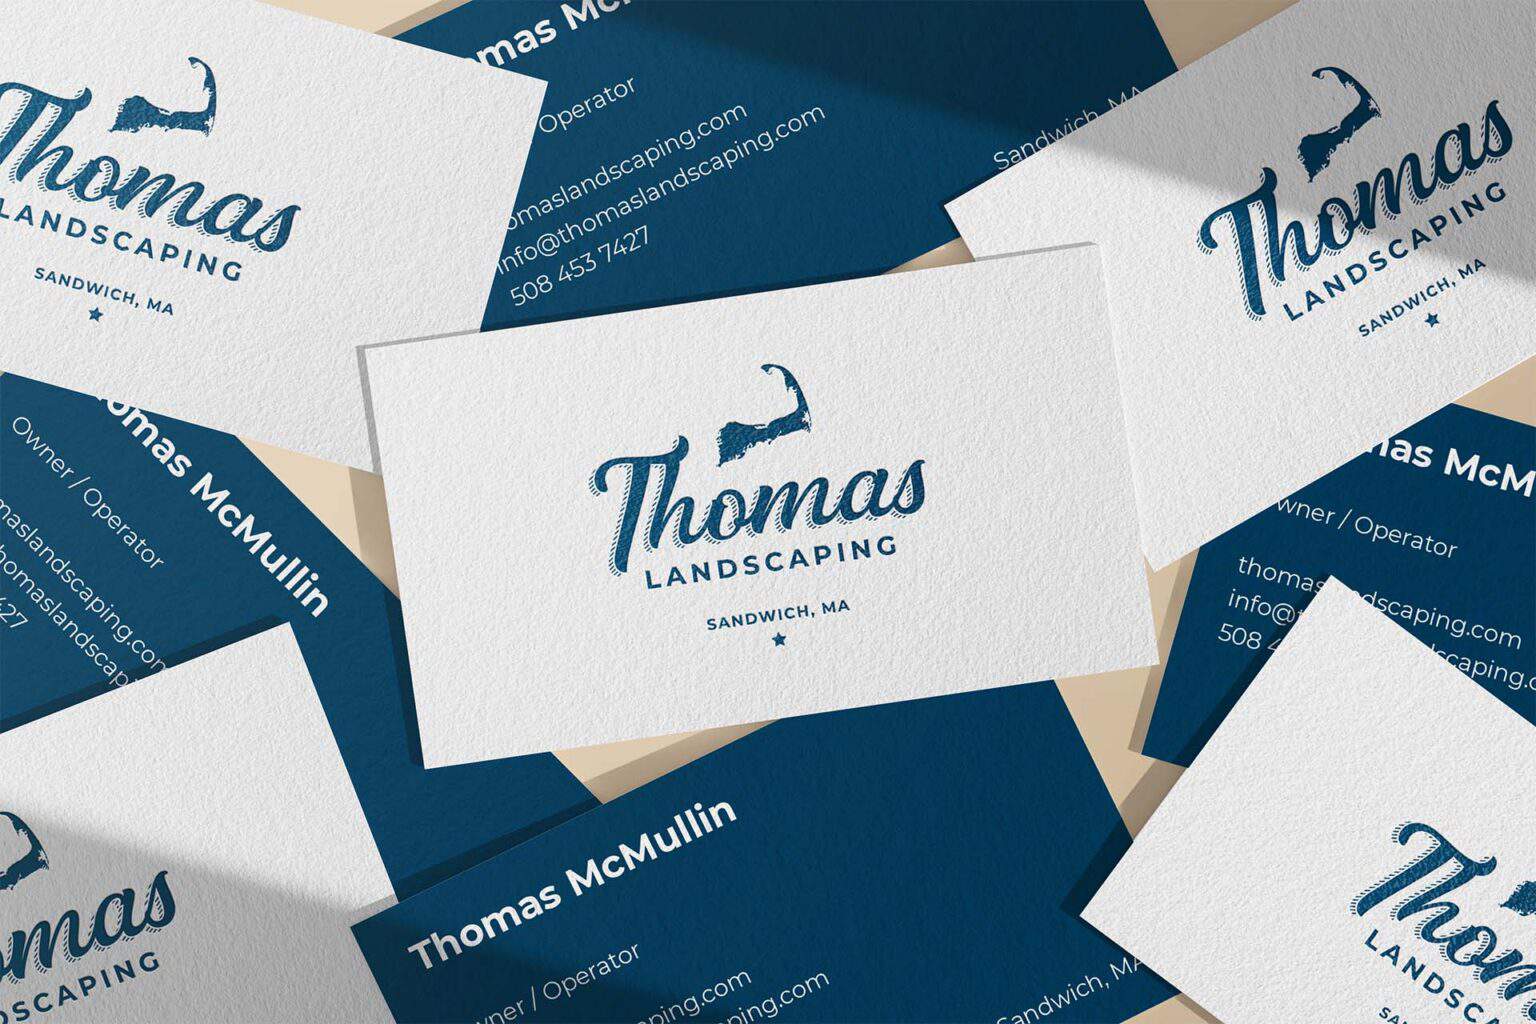 Business card design for Thomas Landscaping.